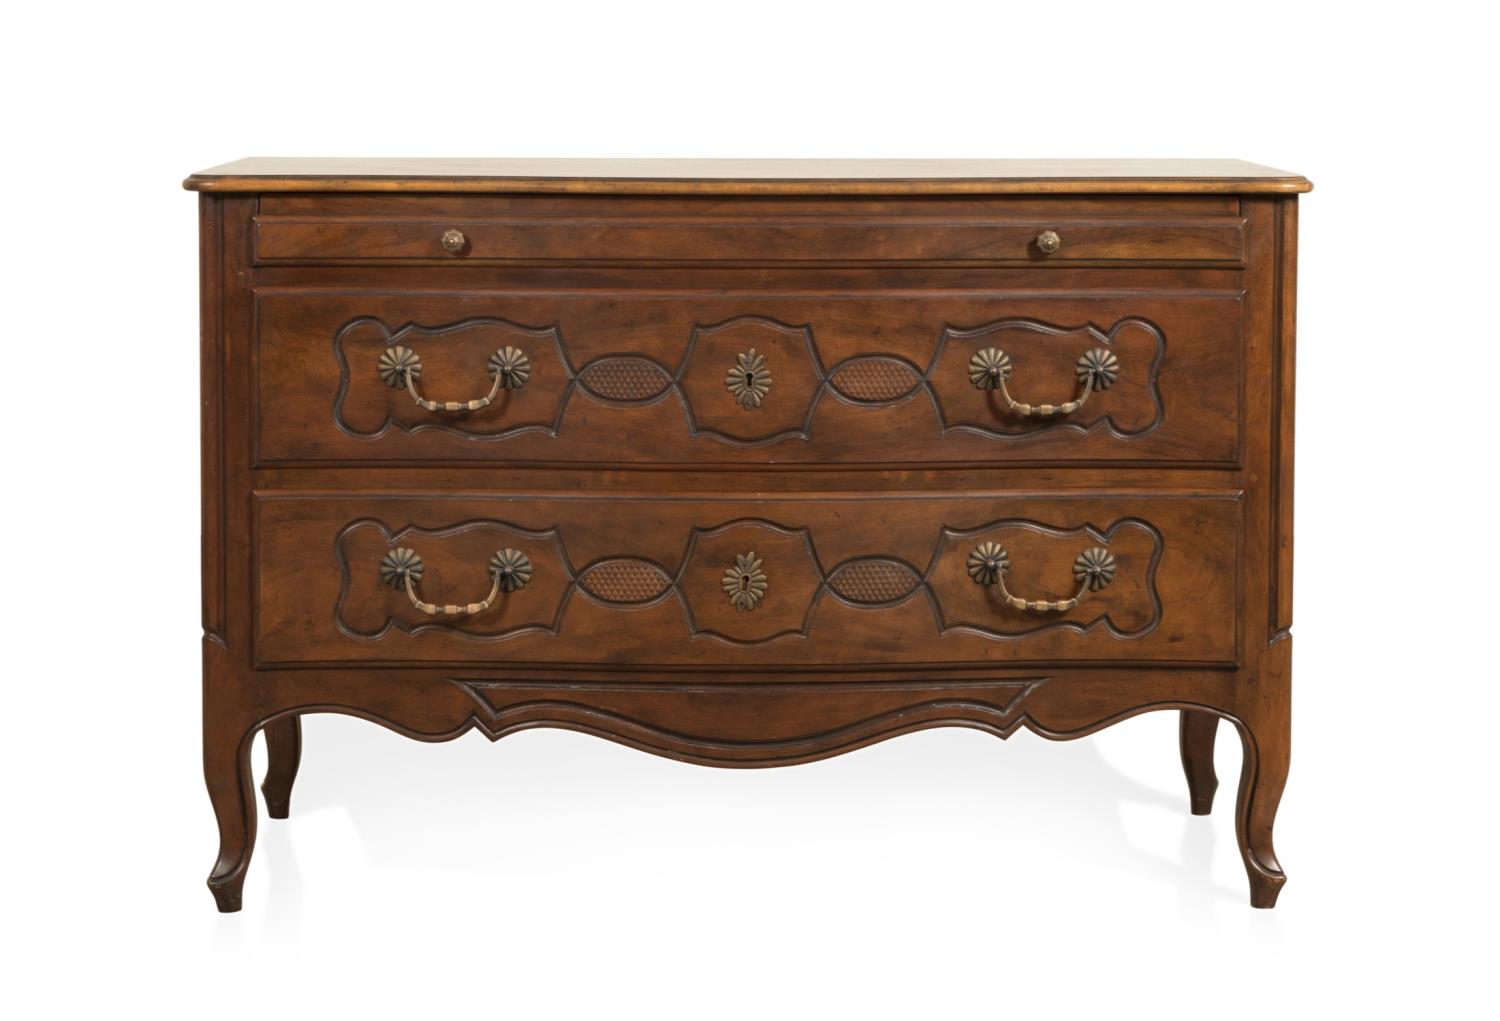 BAKER FRENCH PROVINCIAL STYLE WALNUT 2f970d